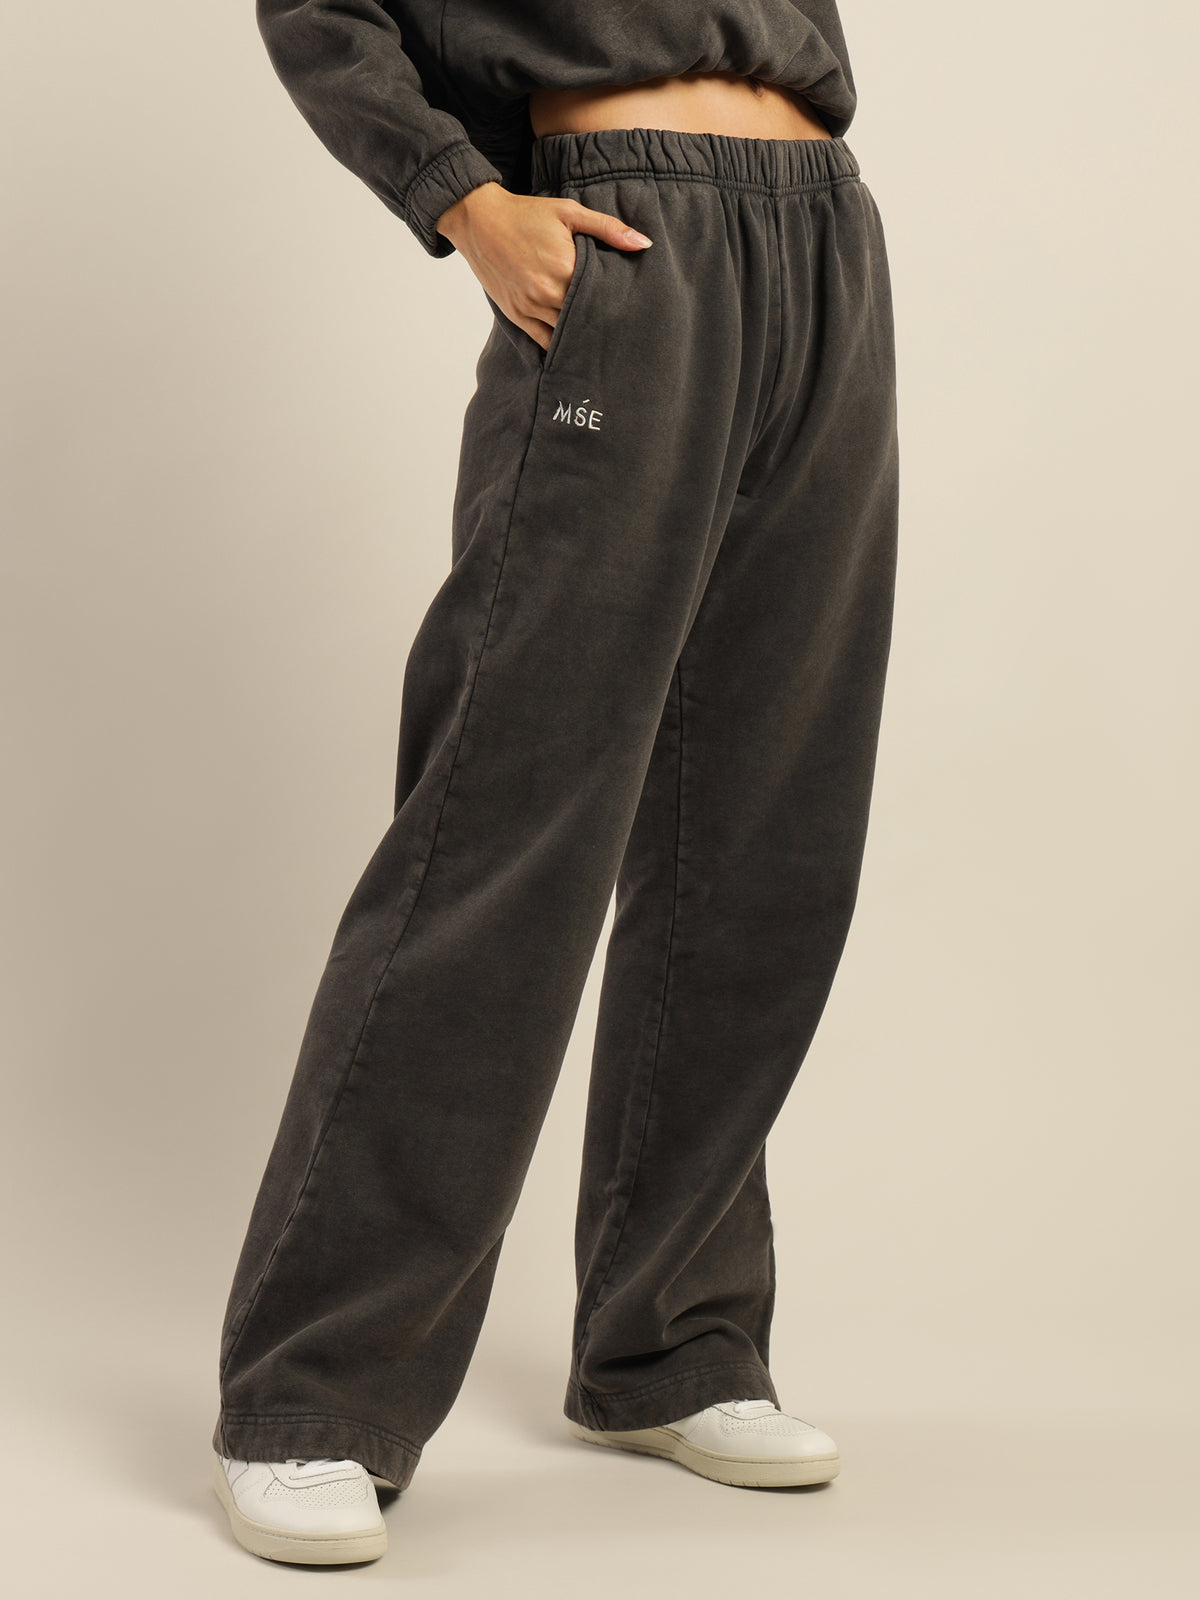 First MSE Trackpants in Charcoal